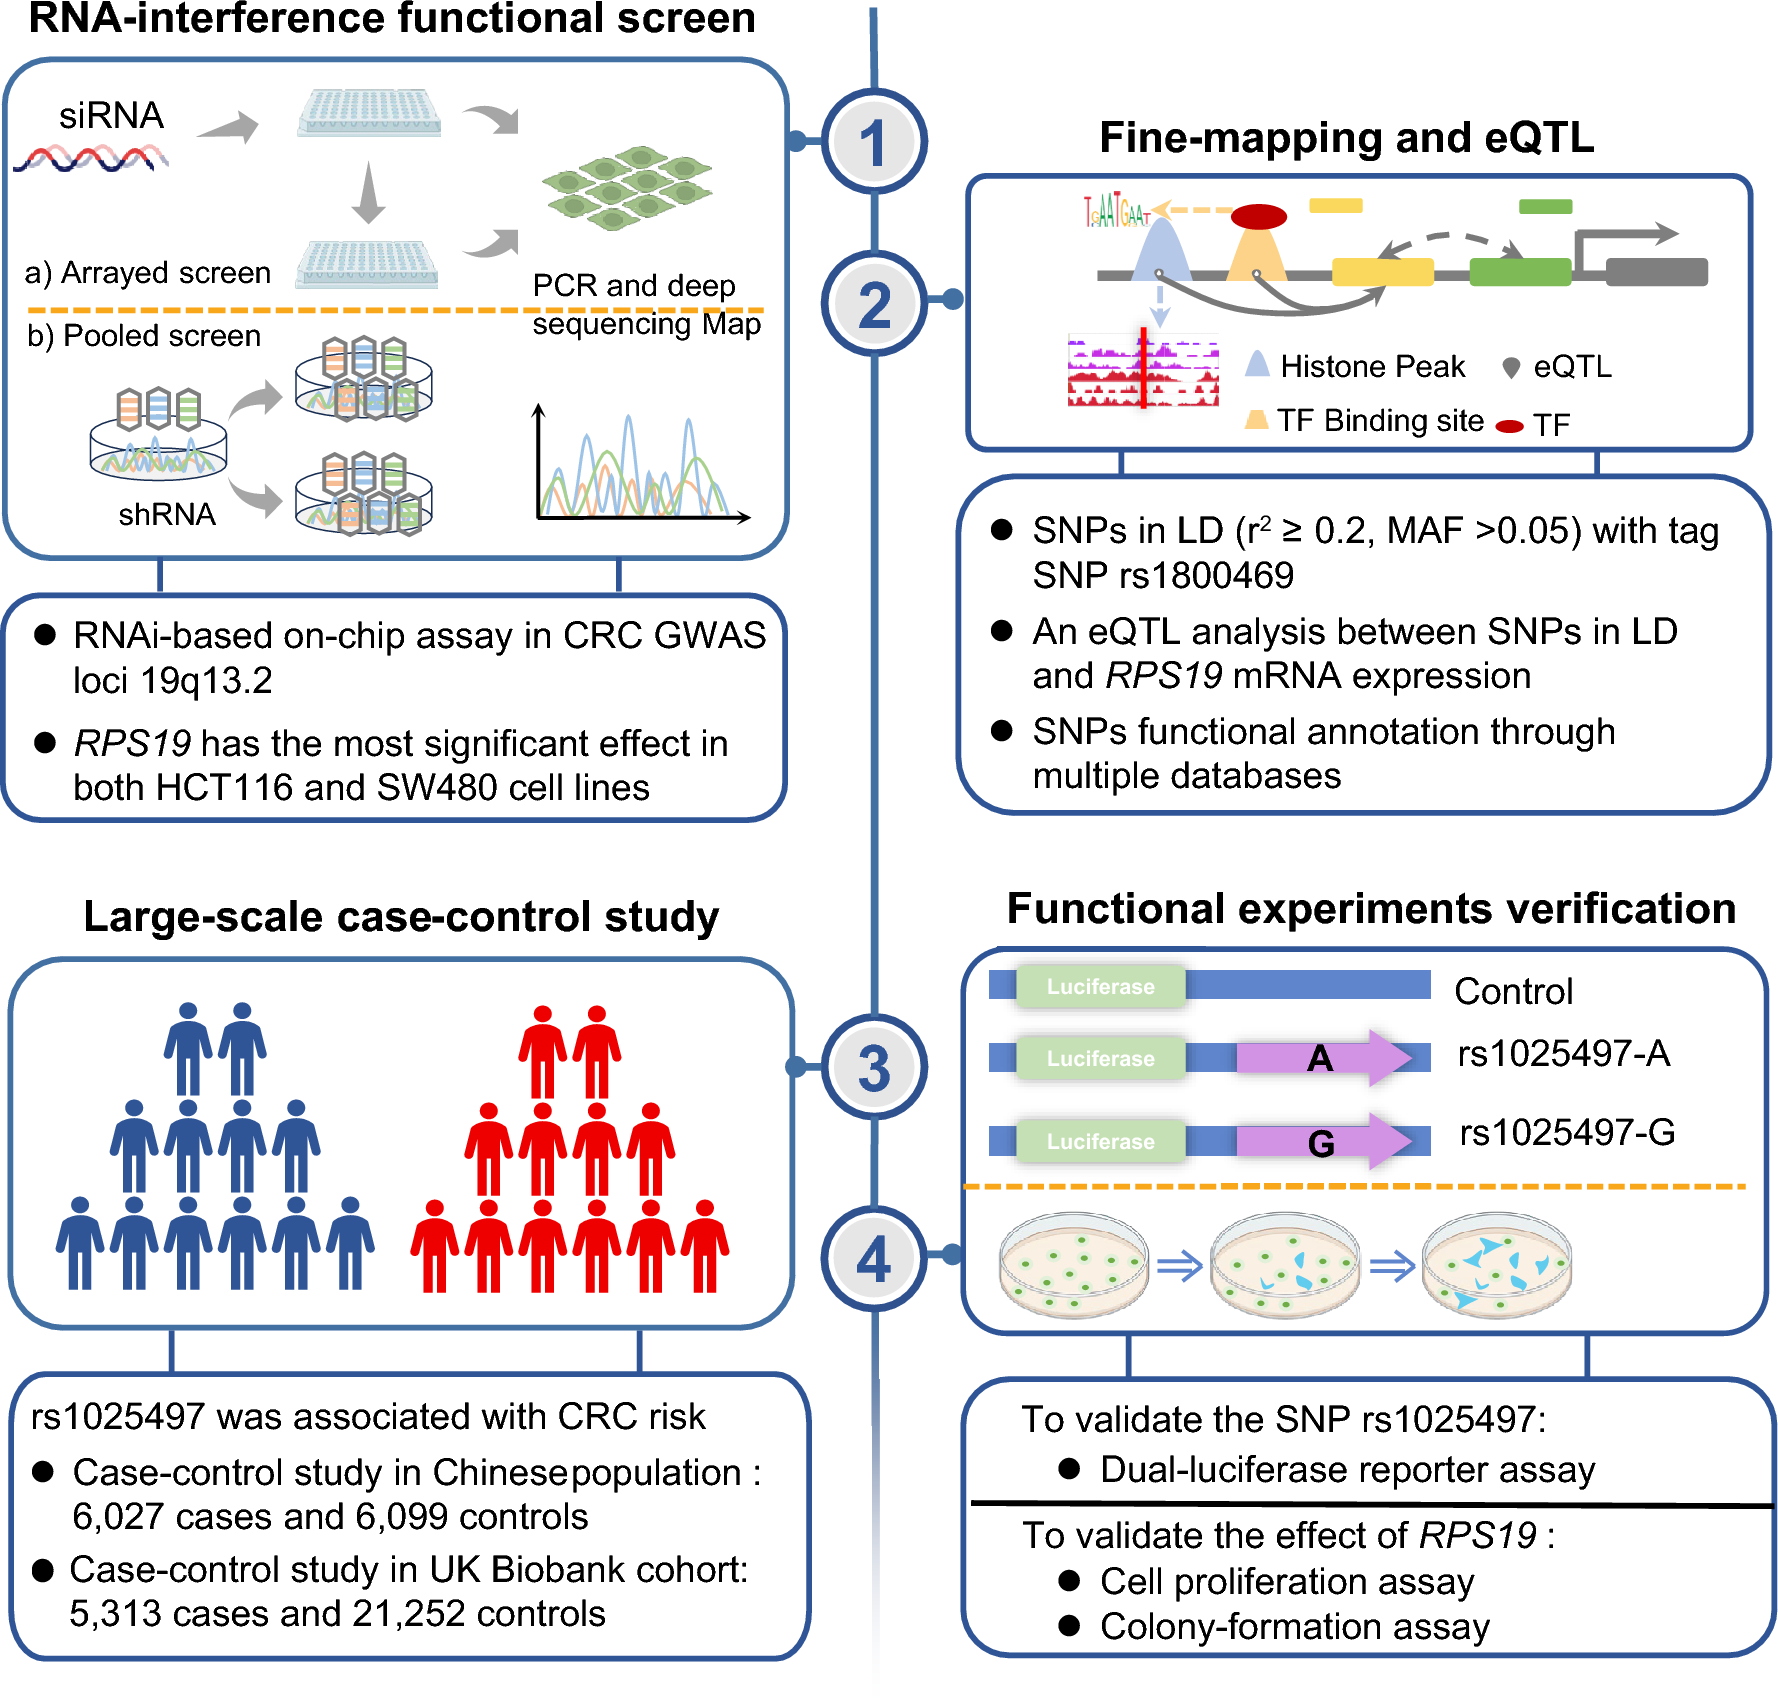 Integrated systematic functional screen and fine-mapping decipher the role and genetic regulation of RPS19 in colorectal cancer development